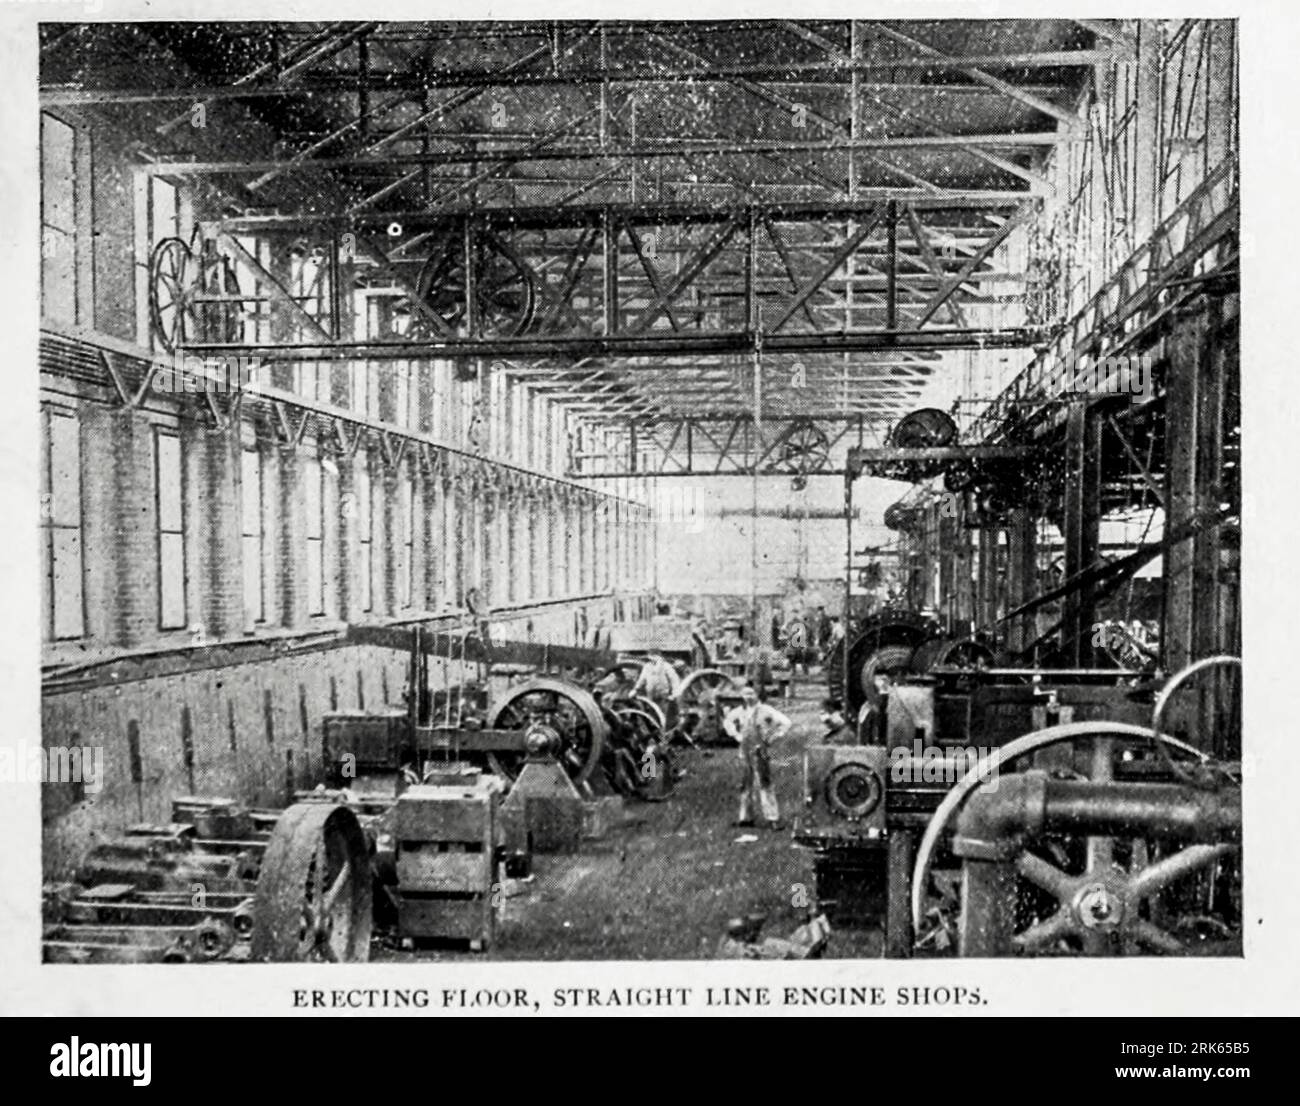 Erecting Floor Sweet's Straight Line Engine Shops, Syracuse NY, from the Article MODERN MACHINE-SHOP ECONOMICS PRIME REQUISITES OF SHOP CONSTRUCTION By Horace L. Arnold from The Engineering Magazine DEVOTED TO INDUSTRIAL PROGRESS Volume XI October 1896 NEW YORK The Engineering Magazine Co Stock Photo